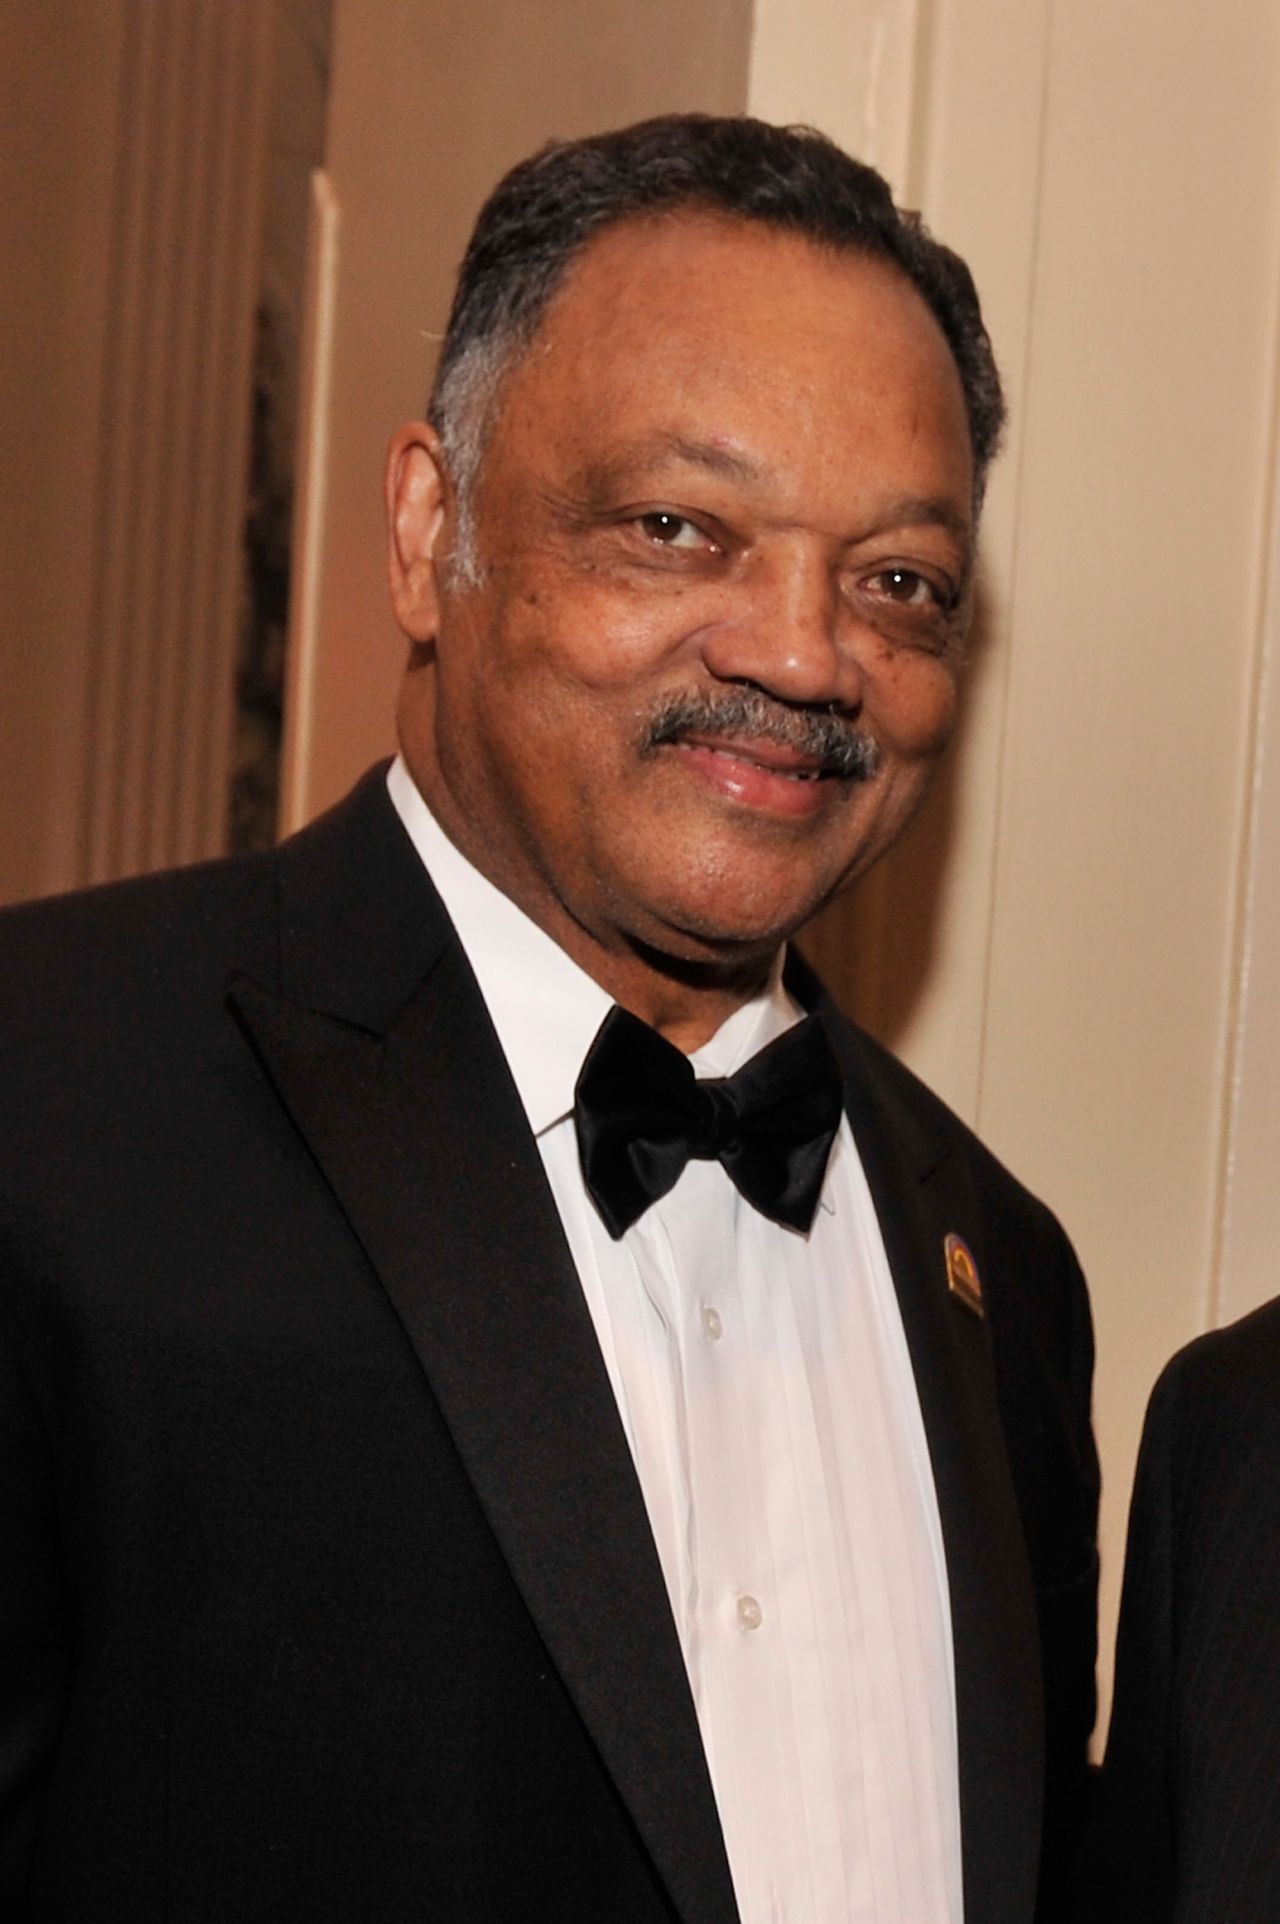 The Rev. Jesse Jackson was waiting to act as a pundit on a news show in 2008 when he was heard saying he'd like to cut off a particular portion of President Obama's body. <a href="http://www.cnn.com/2008/POLITICS/07/09/jesse.jackson.comment/" target="_blank">He later told CNN</a> he didn't realize his microphone was on.